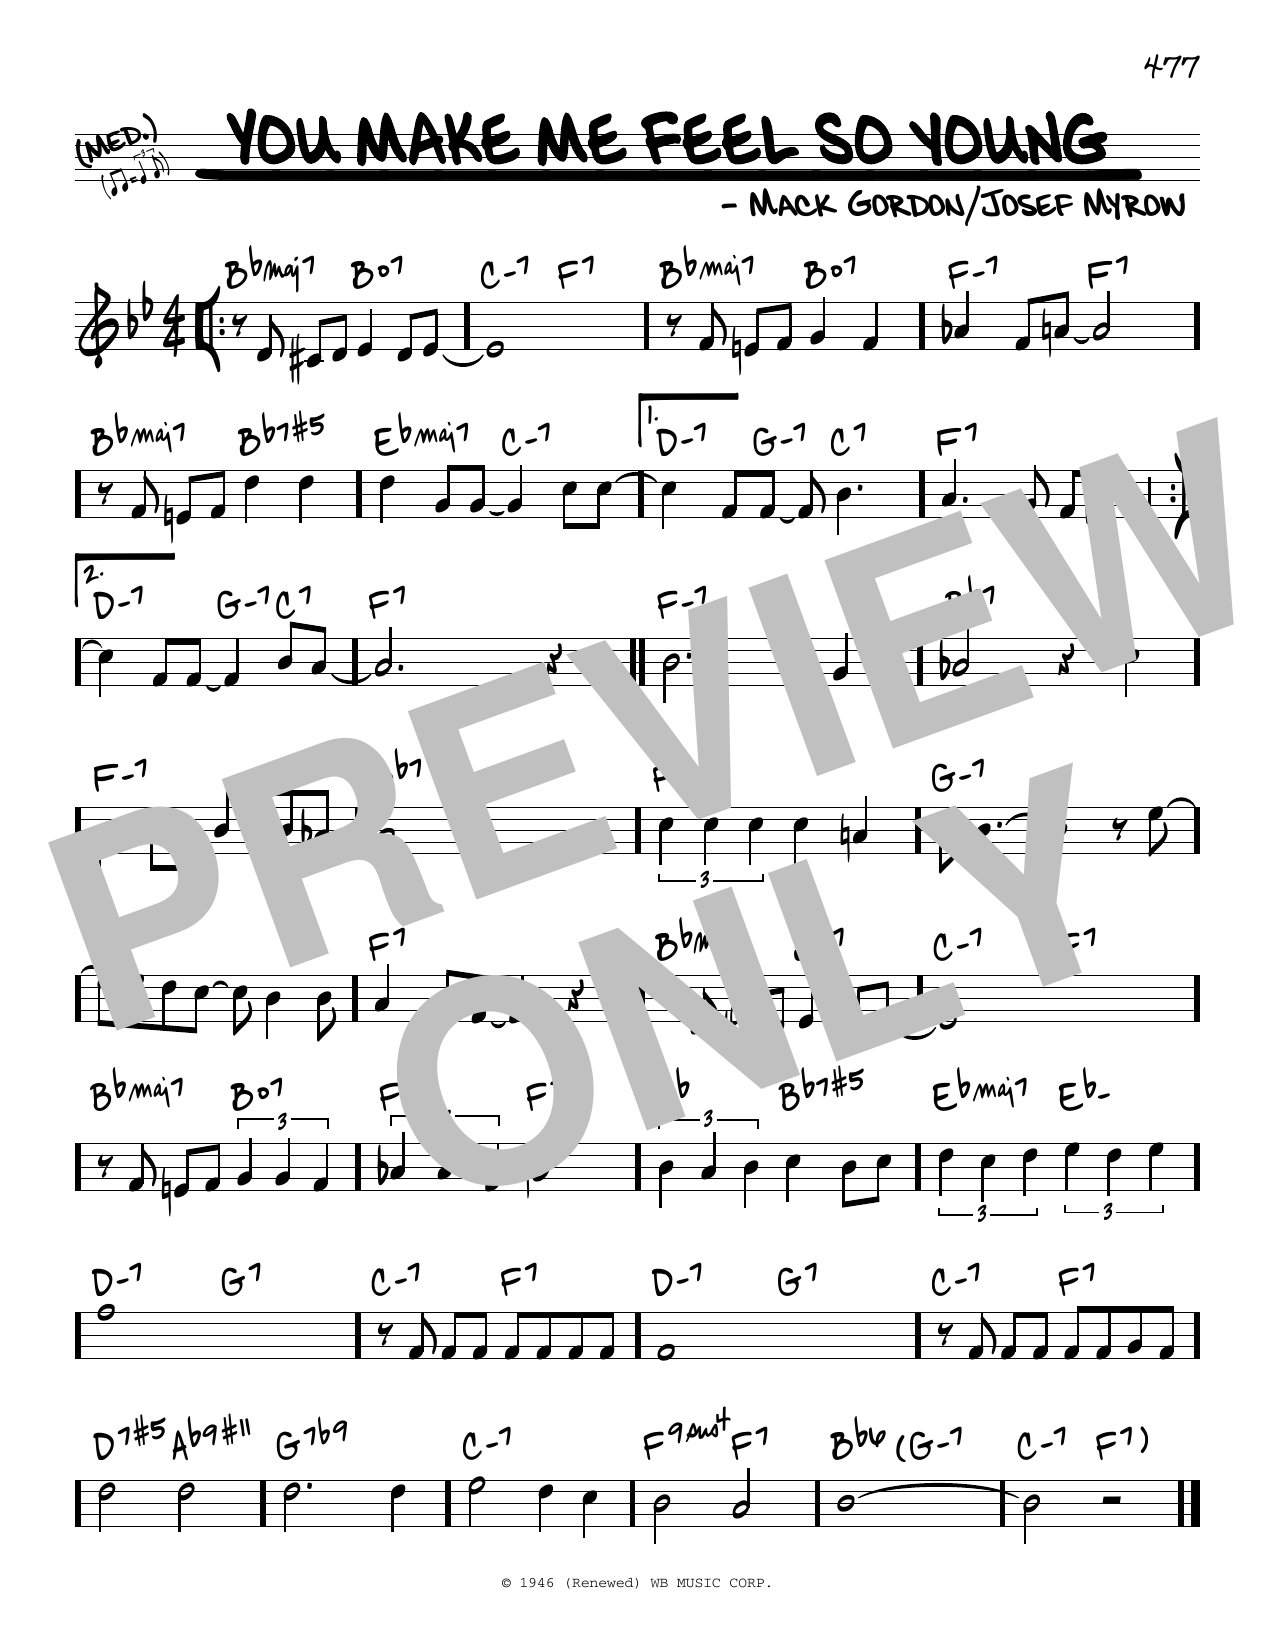 Download Frank Sinatra You Make Me Feel So Young Sheet Music